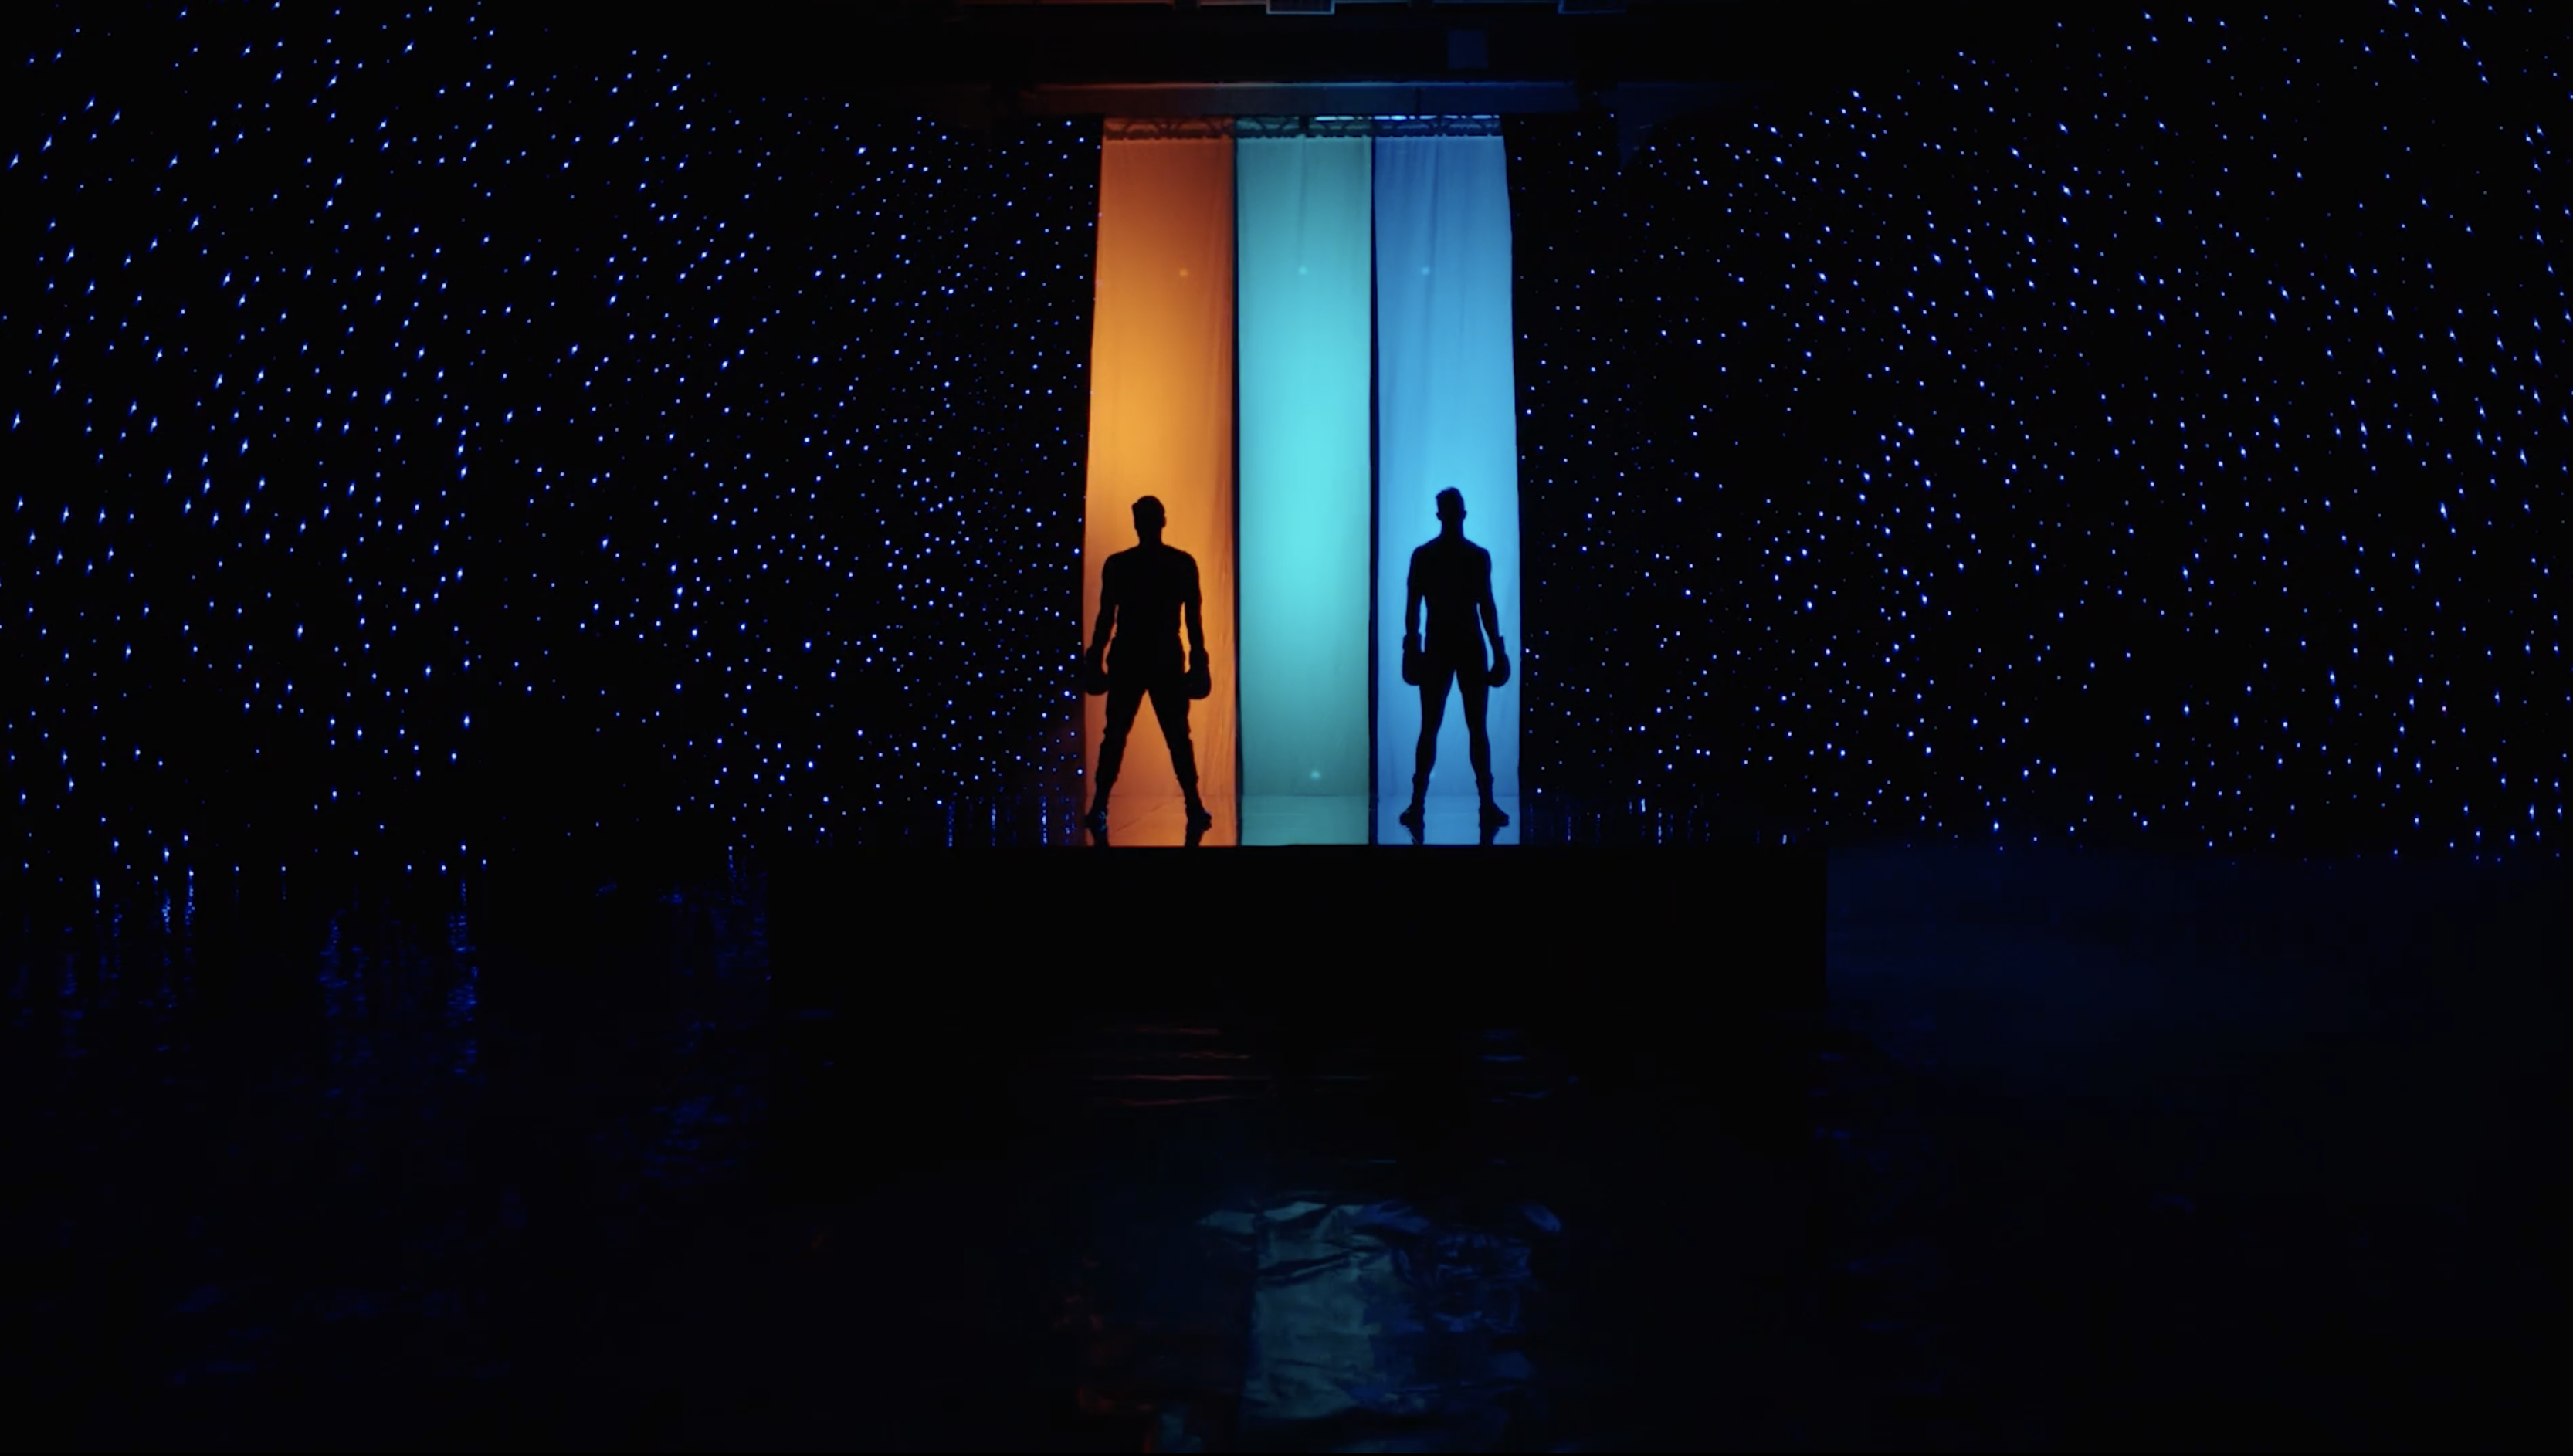 Two men silhouetted in front of orange and blue draped banners